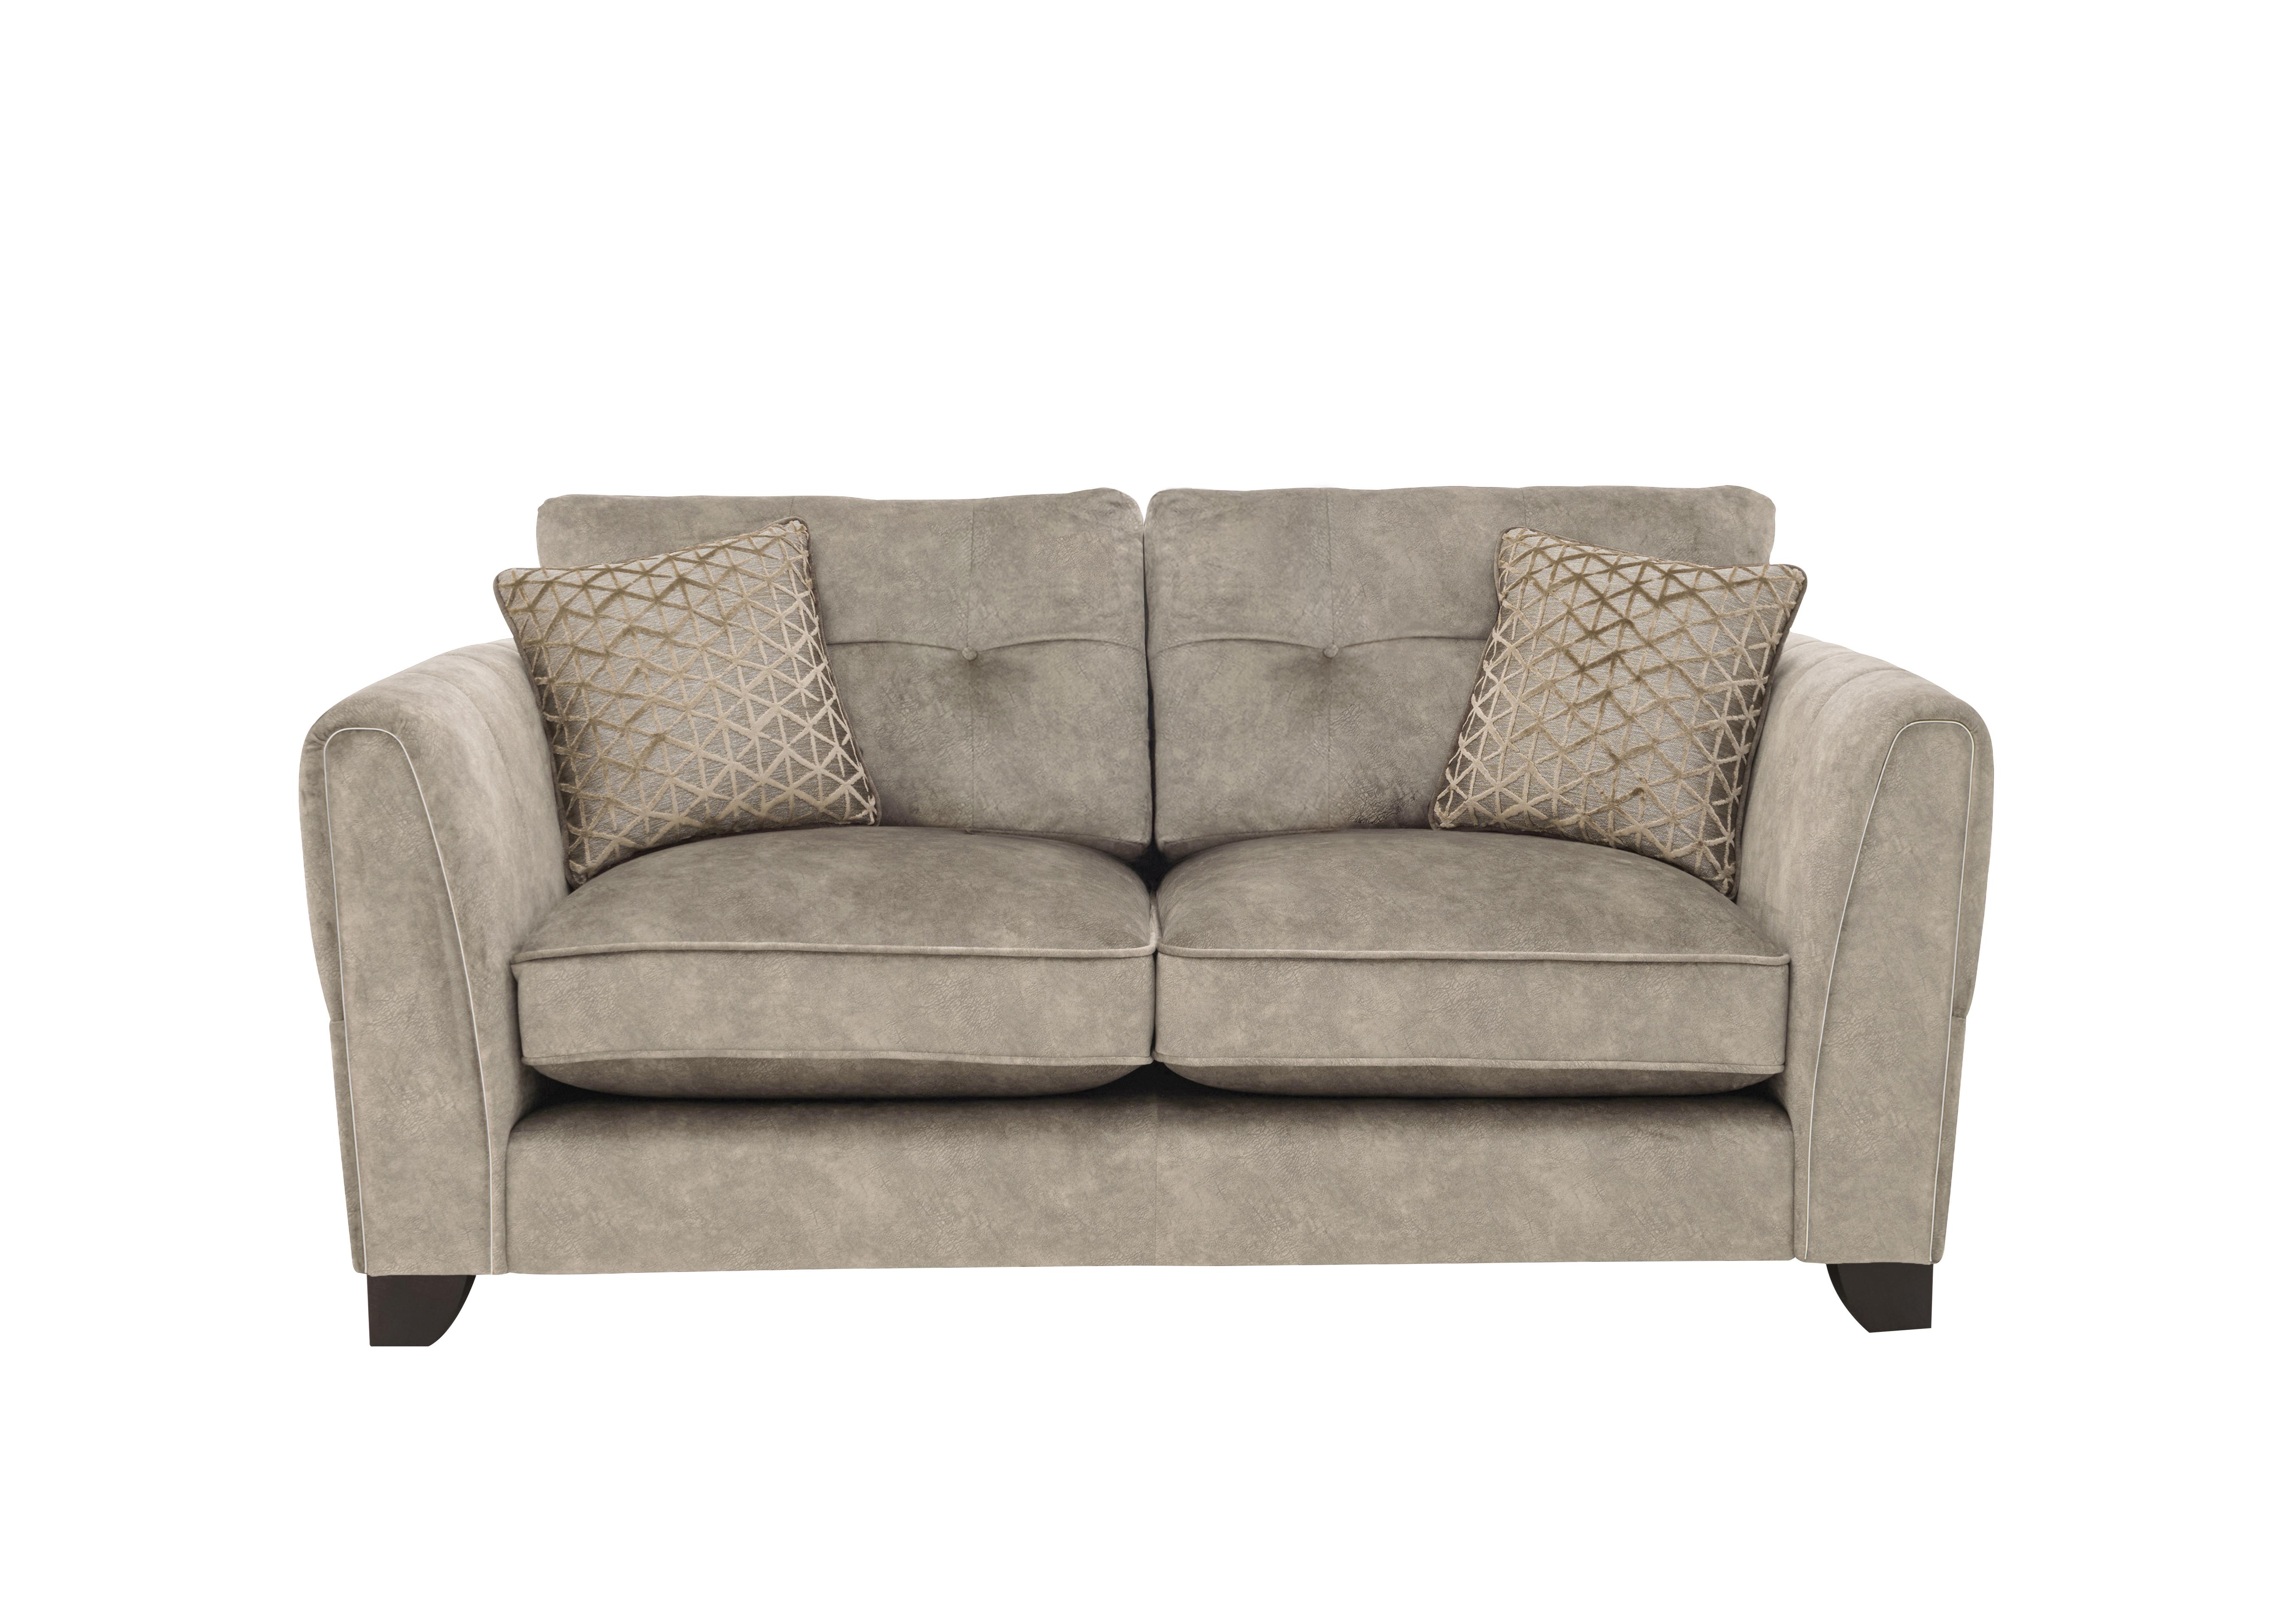 Ariana 2 Seater Fabric Classic Back Sofa in Dapple Oyster Chrome Insert on Furniture Village